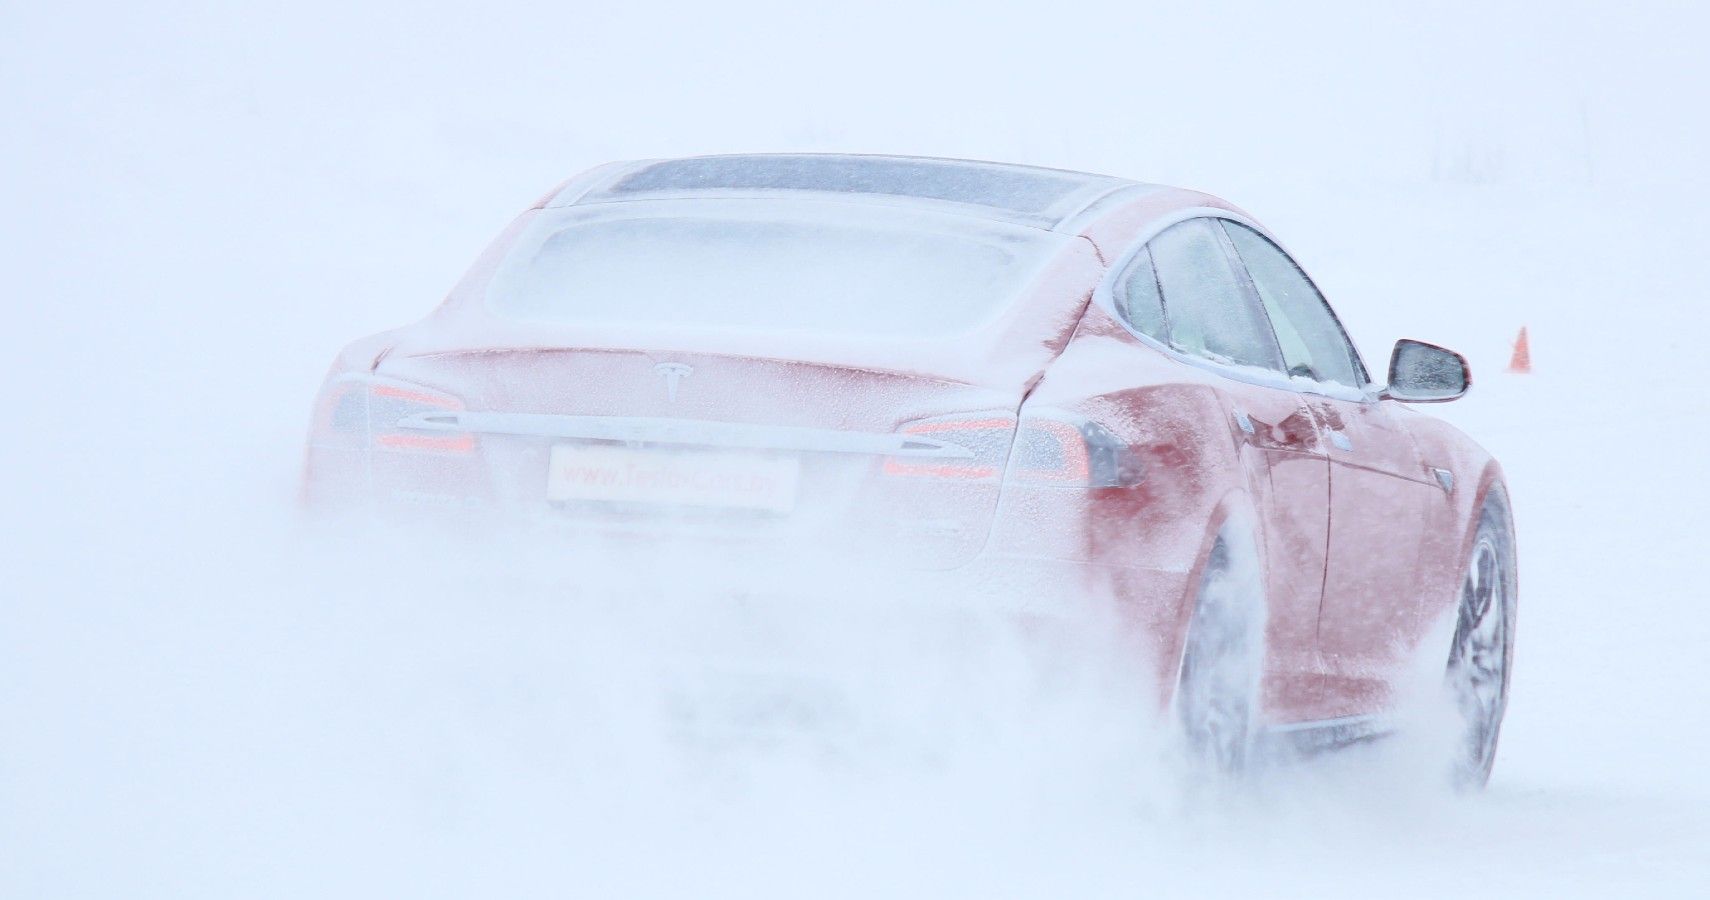 What They Don’t Tell You About Driving Electric Cars In The Winter